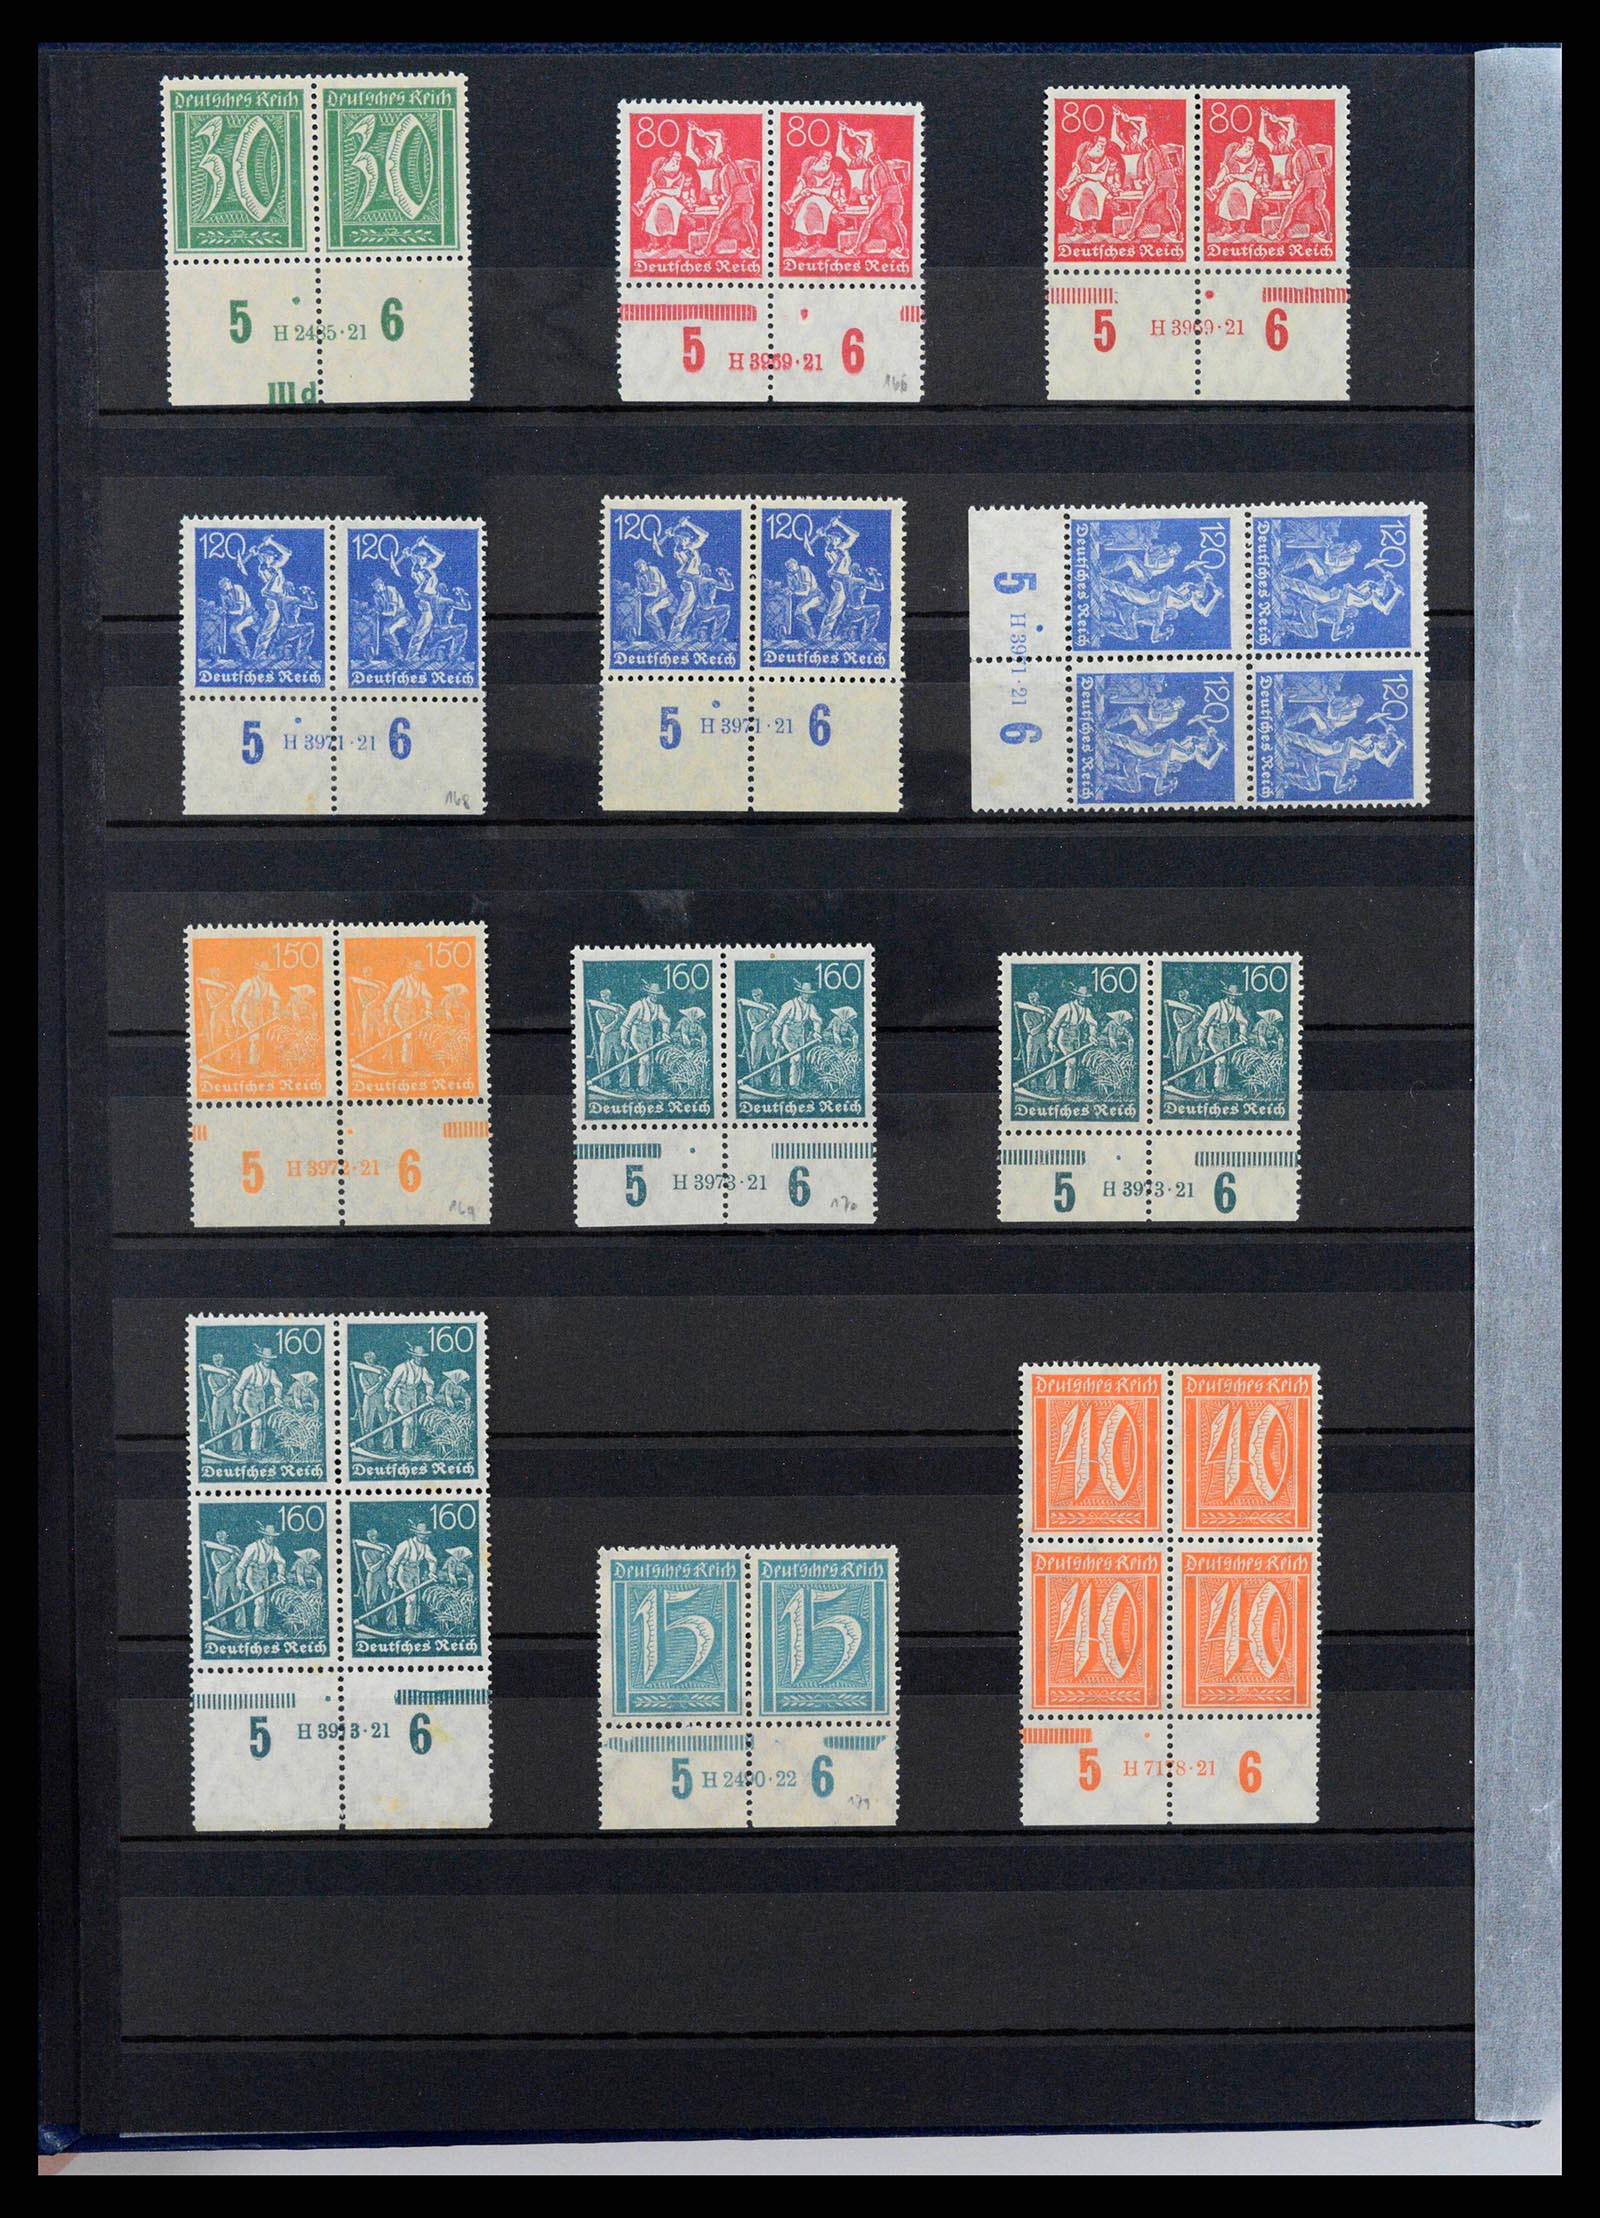 38417 0003 - Stamp collection 38417 German Reich infla 1922-1923.